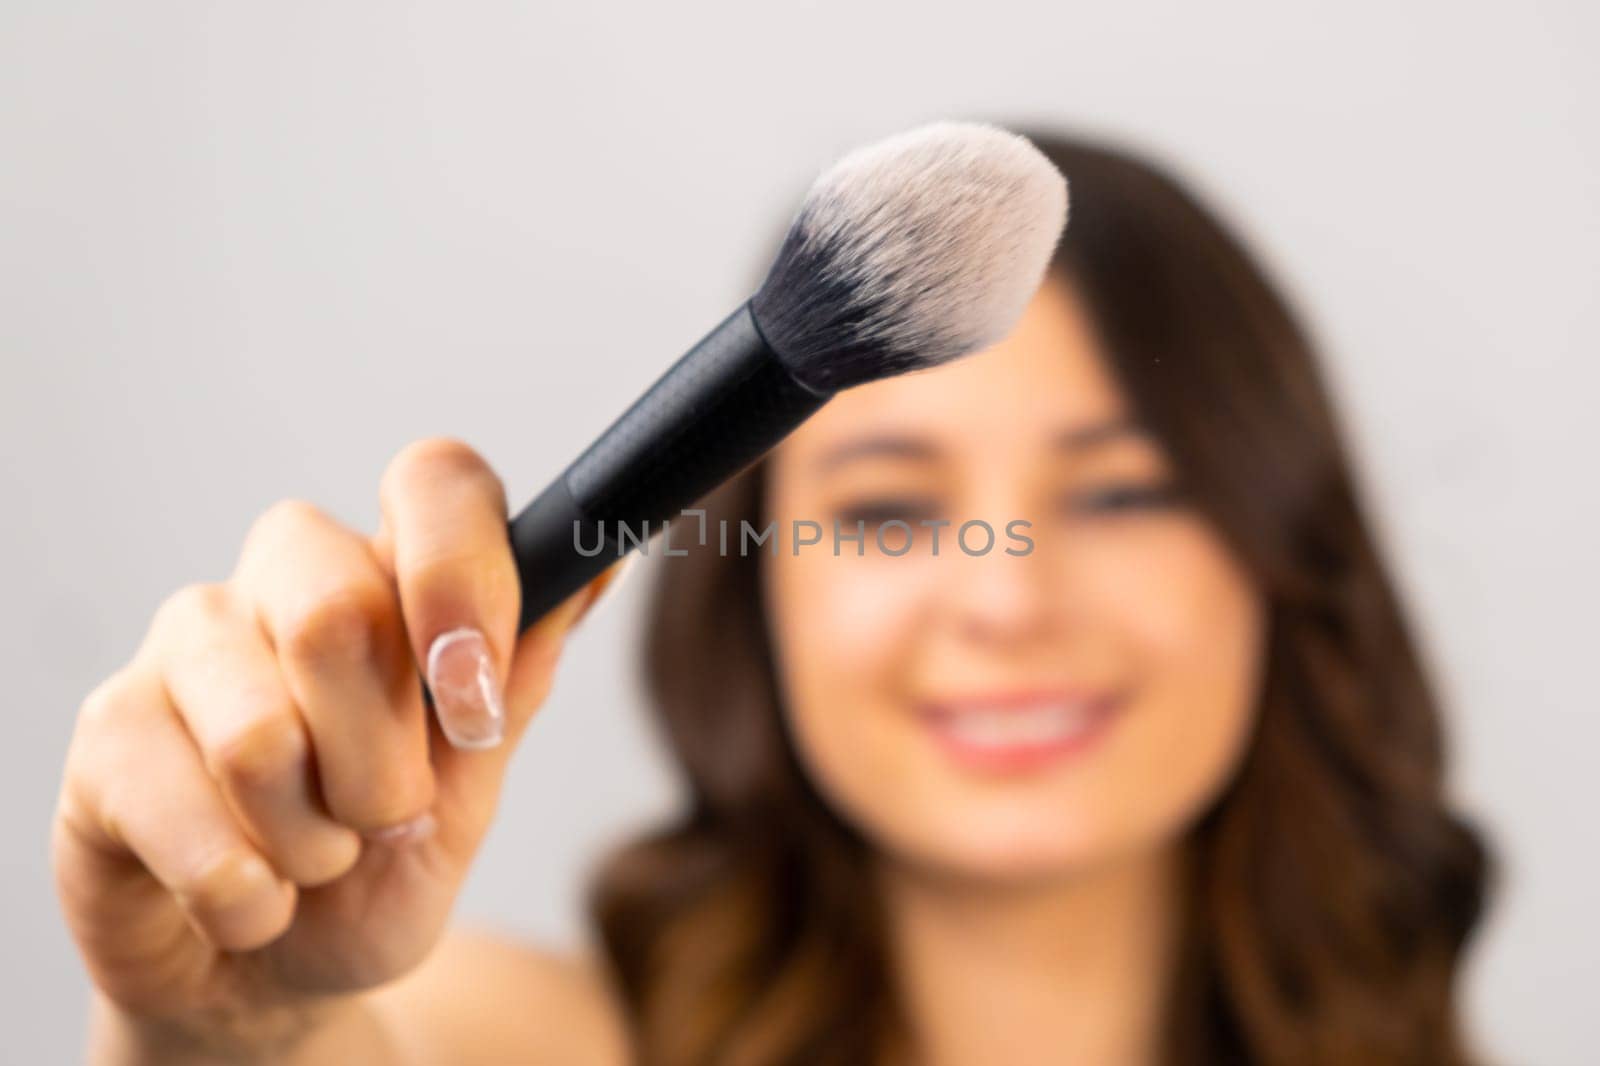 Young brunette model holding of big brush for applzing powder in front of face, selective focus